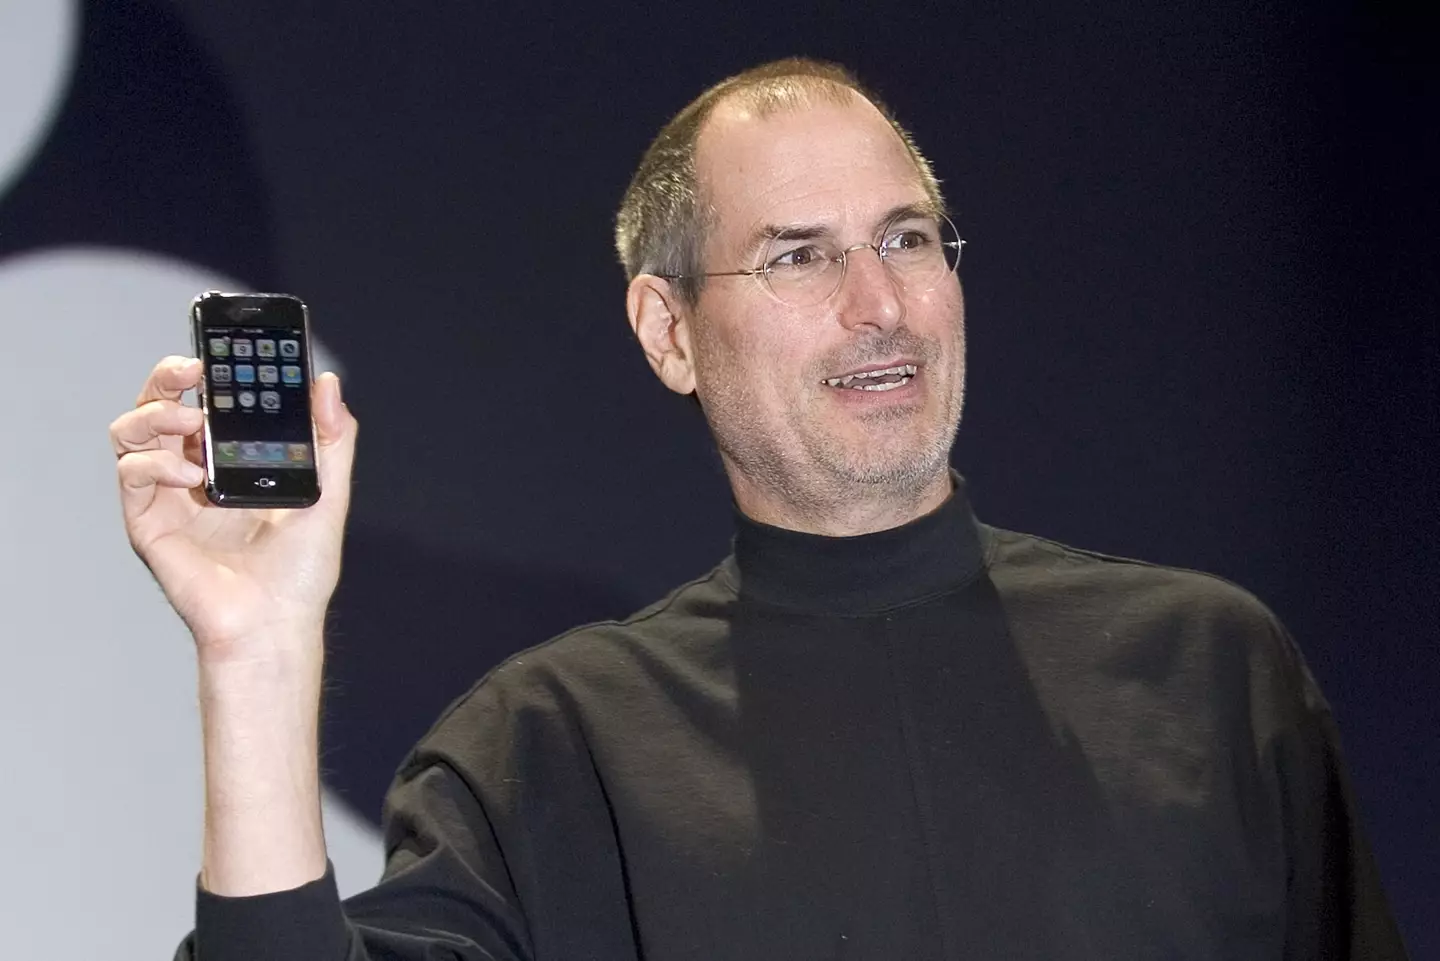 Steve Jobs unveiled the first iPhone back in 2007.